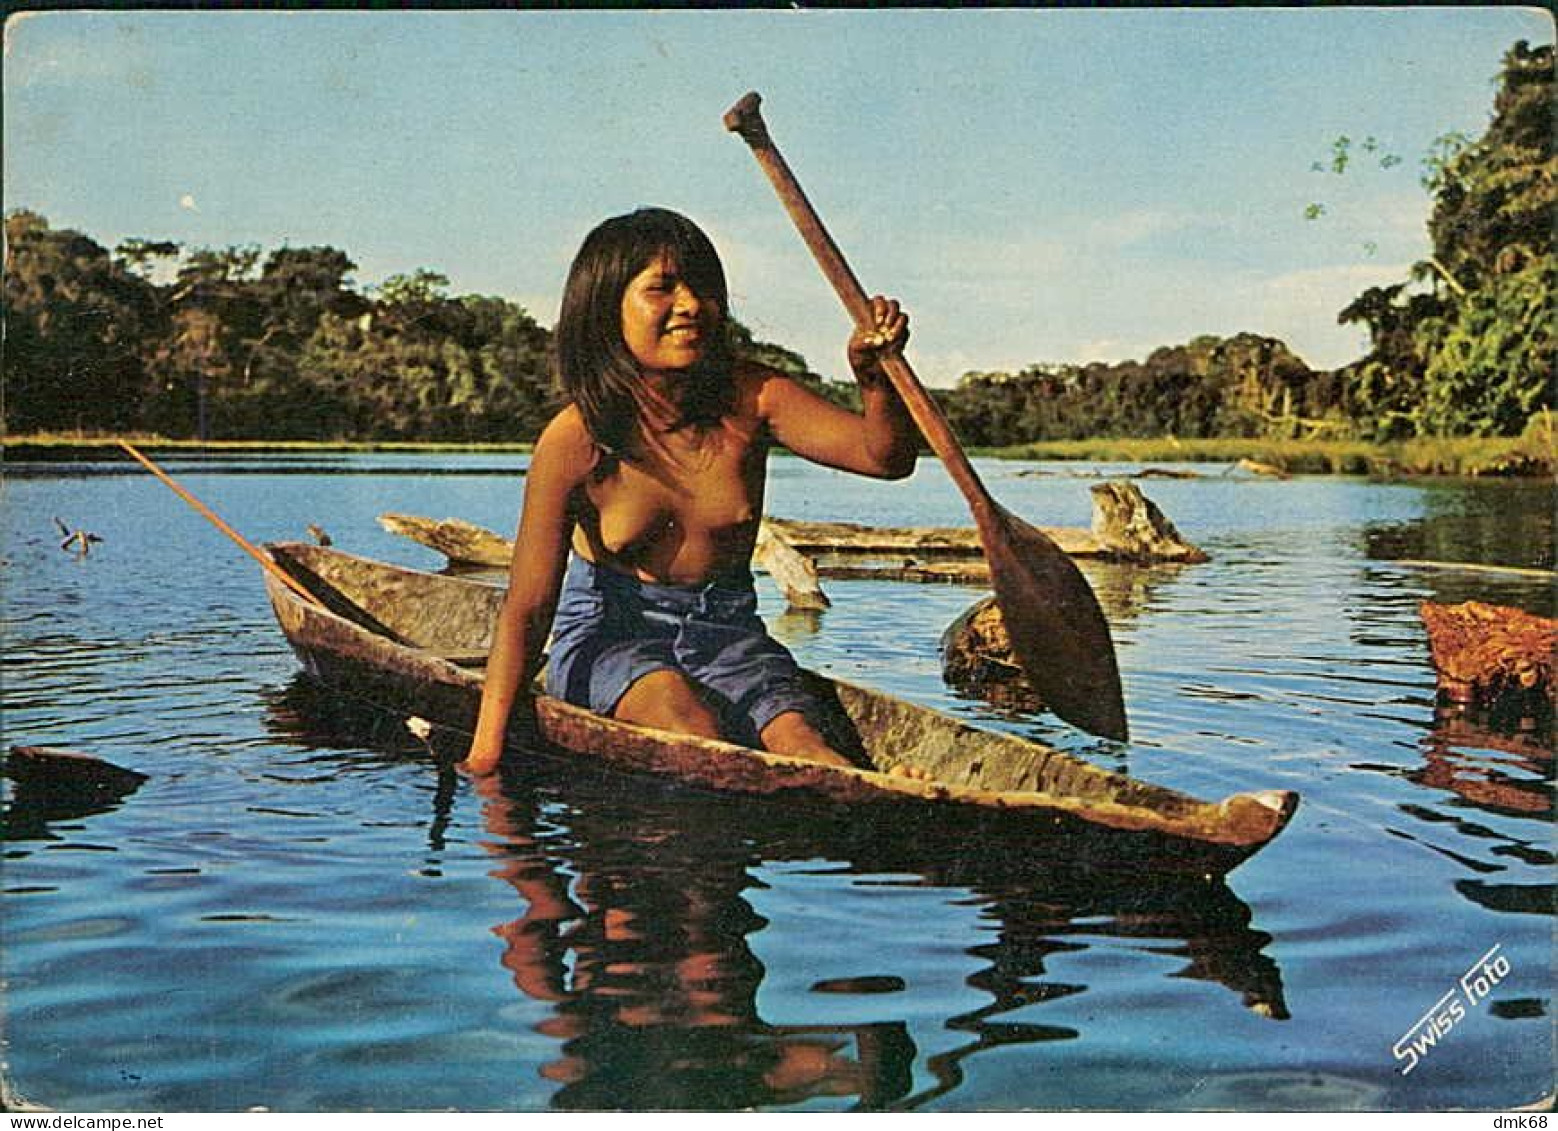 PERU - AMAZON JUNGLE - HALF NAKED / NUDE / NU JIBARO GIRL IN A CANOE - MAILED 1979 / RED POSTMARK (18045) - Amérique